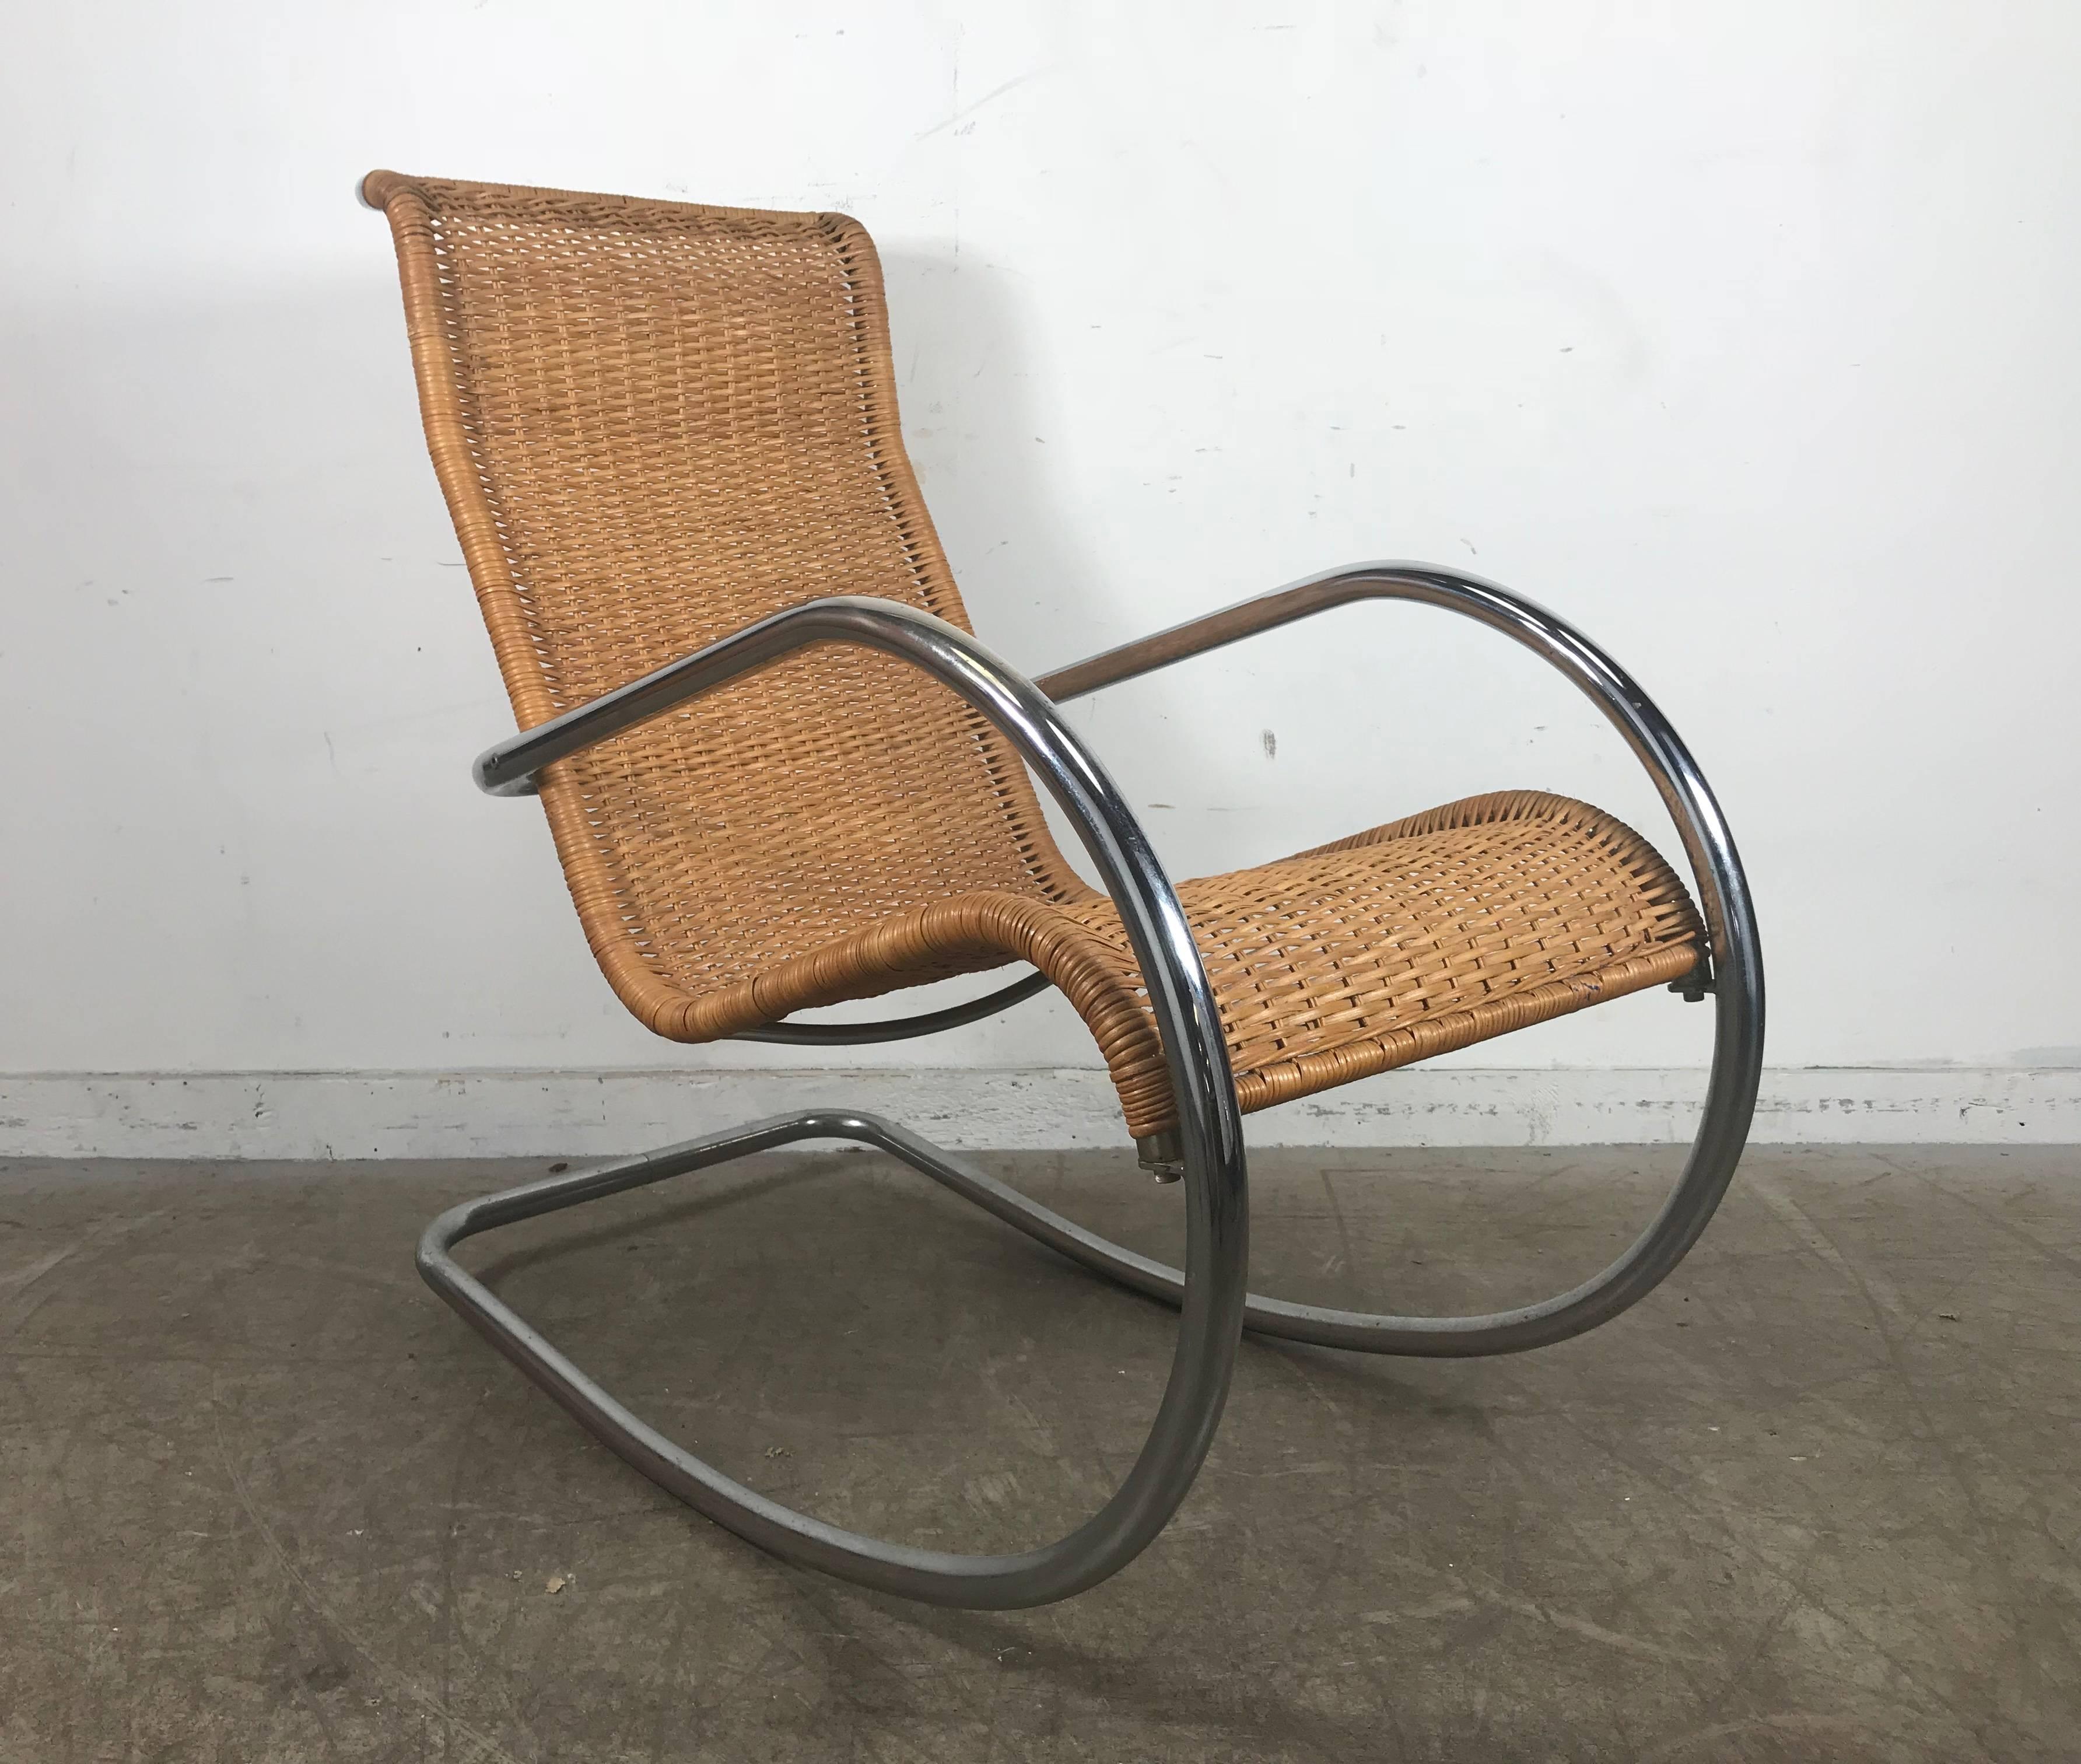 Well constructed tubular chrome and wicker vintage rocker, marked made in Italy, extremely comfortable.
Clearly a take on Mies van der Rohe's cantilevered chair designs.